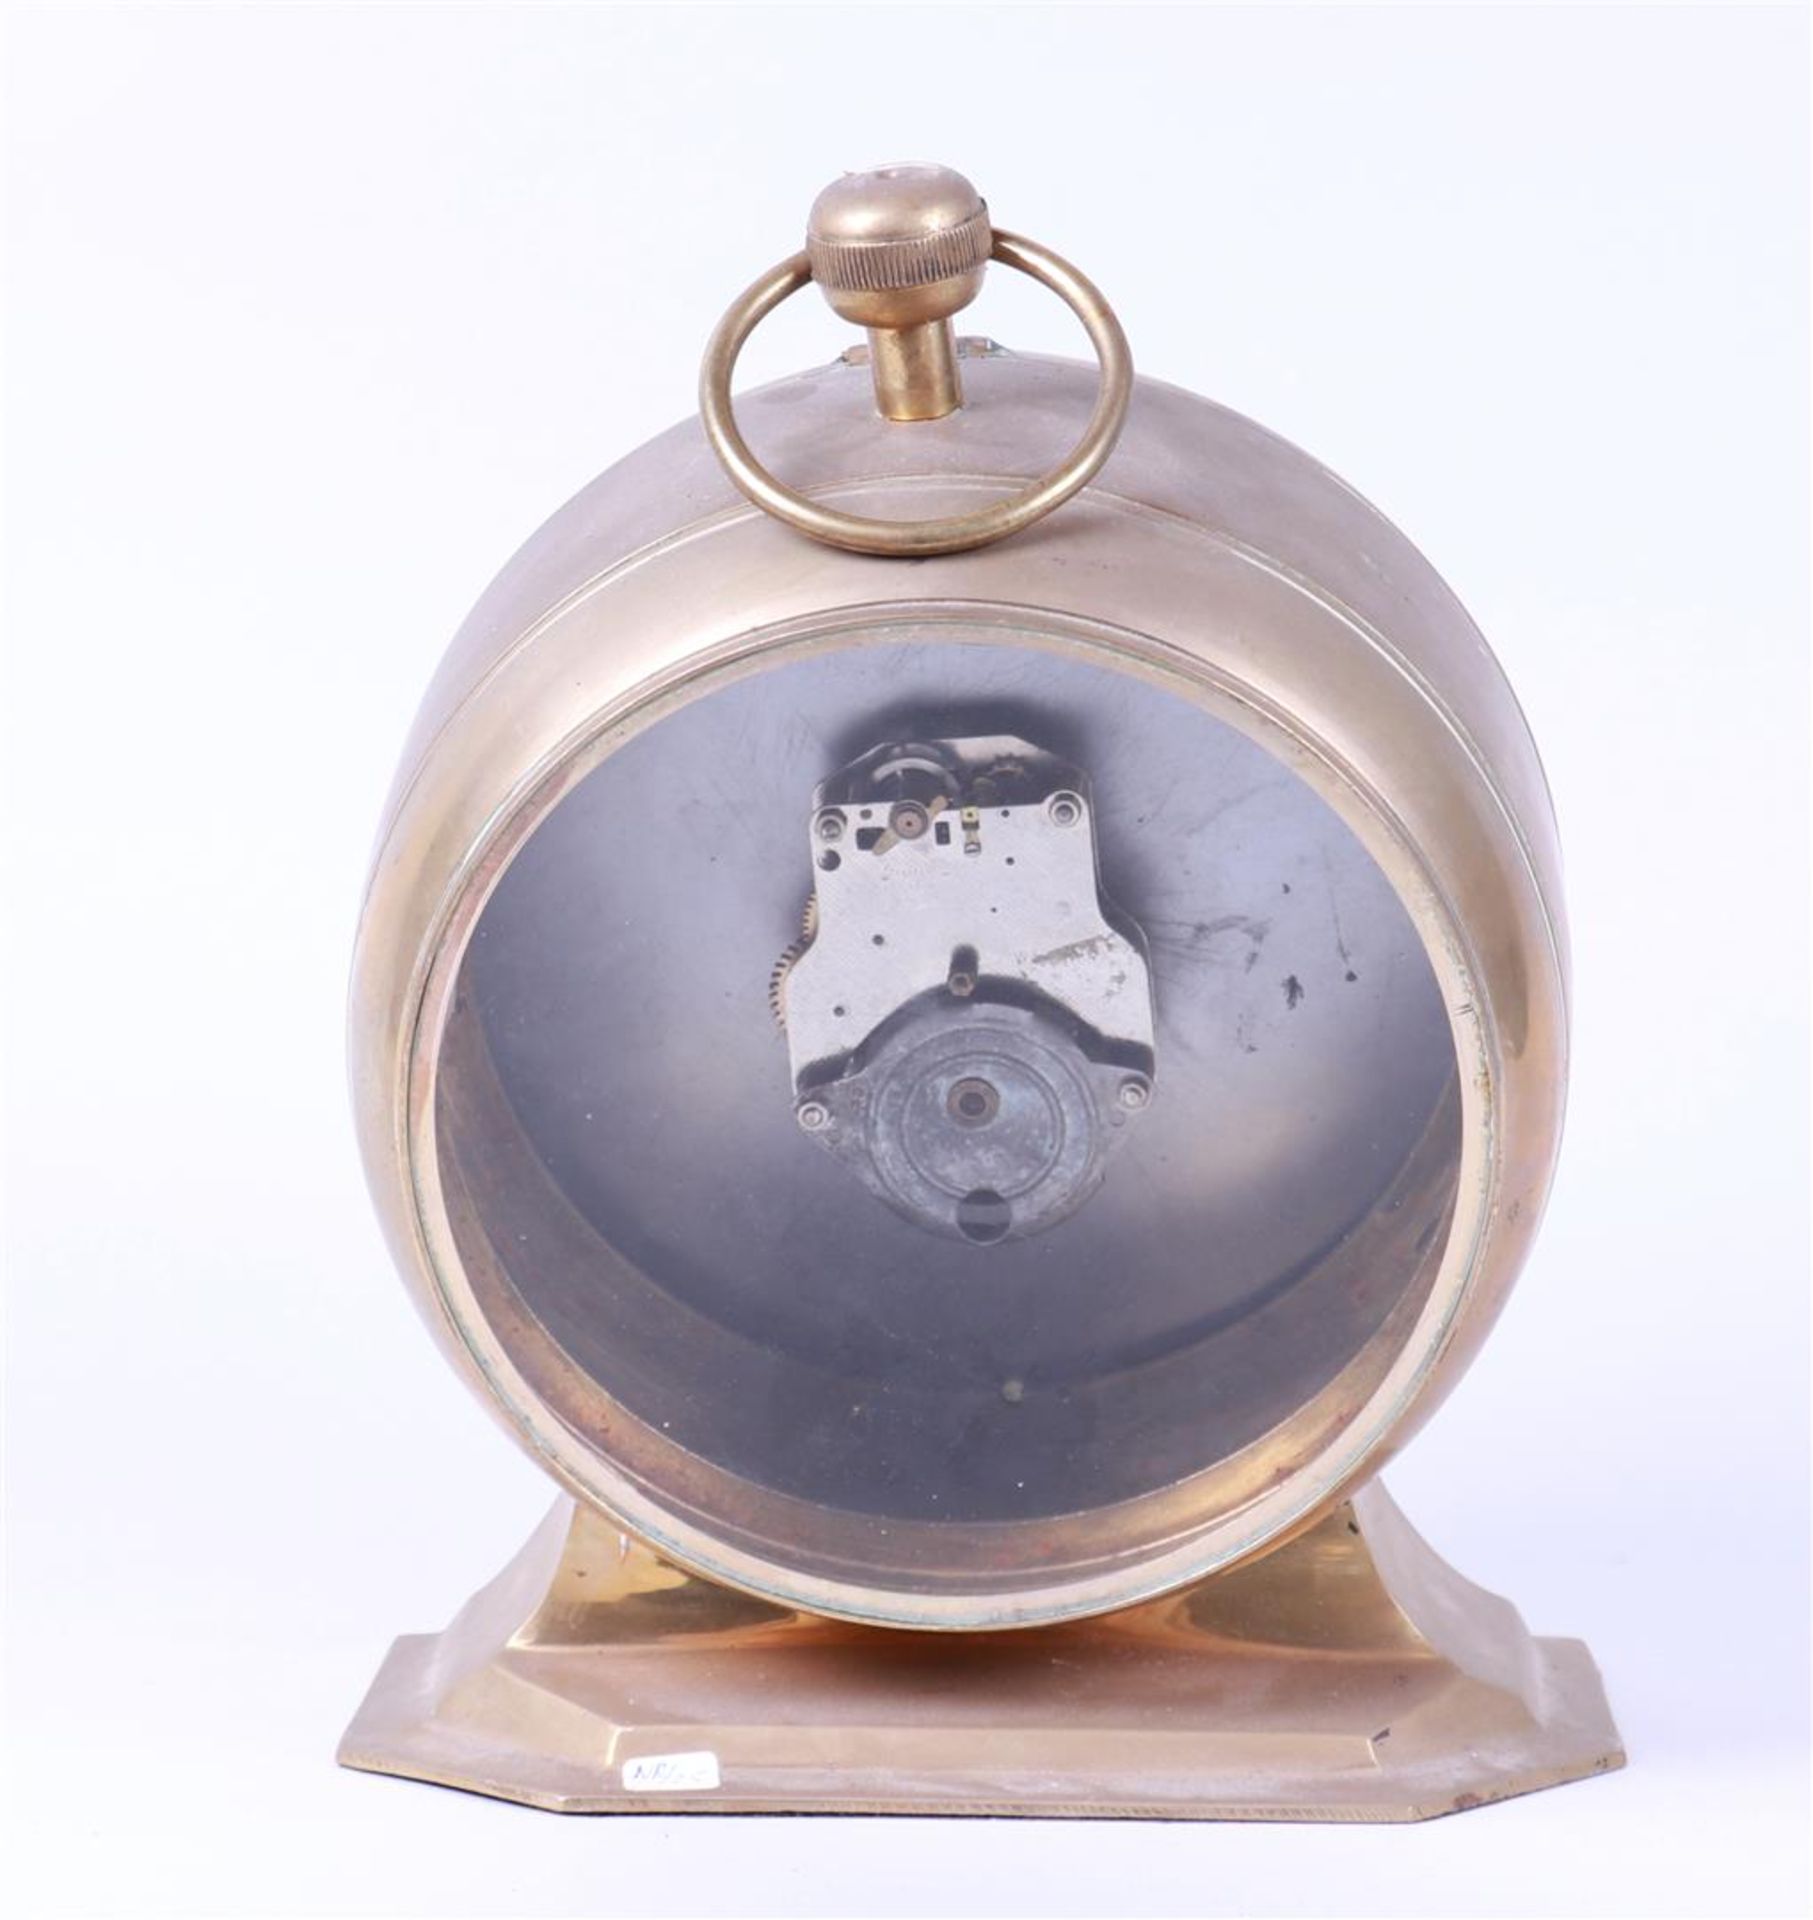 Shop Window Enlargement of a Coachman's Clock with Cut Glass Front (Damages) - Image 2 of 2